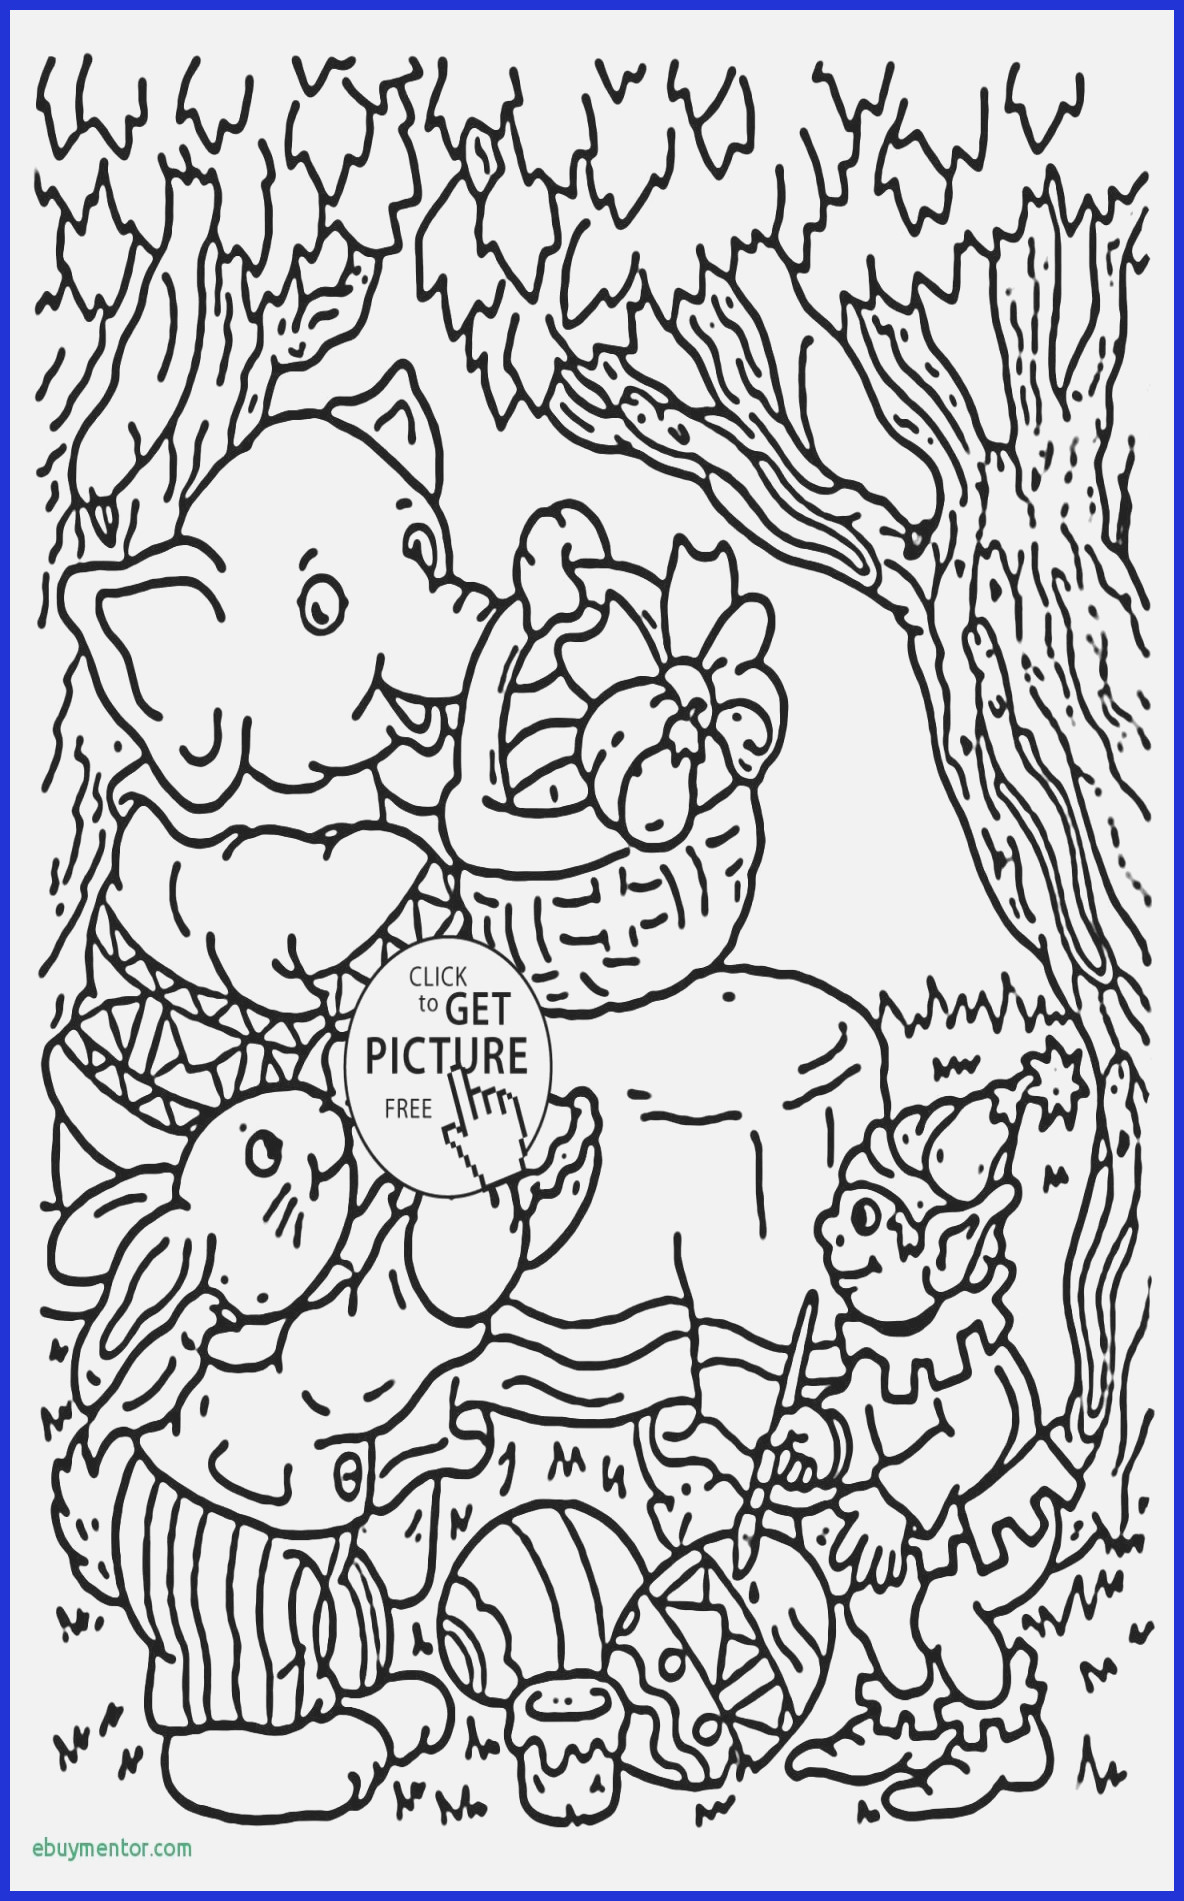 Word Search Coloring Pages Coloring Ideas Dental Coloring Pages Word Search Puzzles For Kids